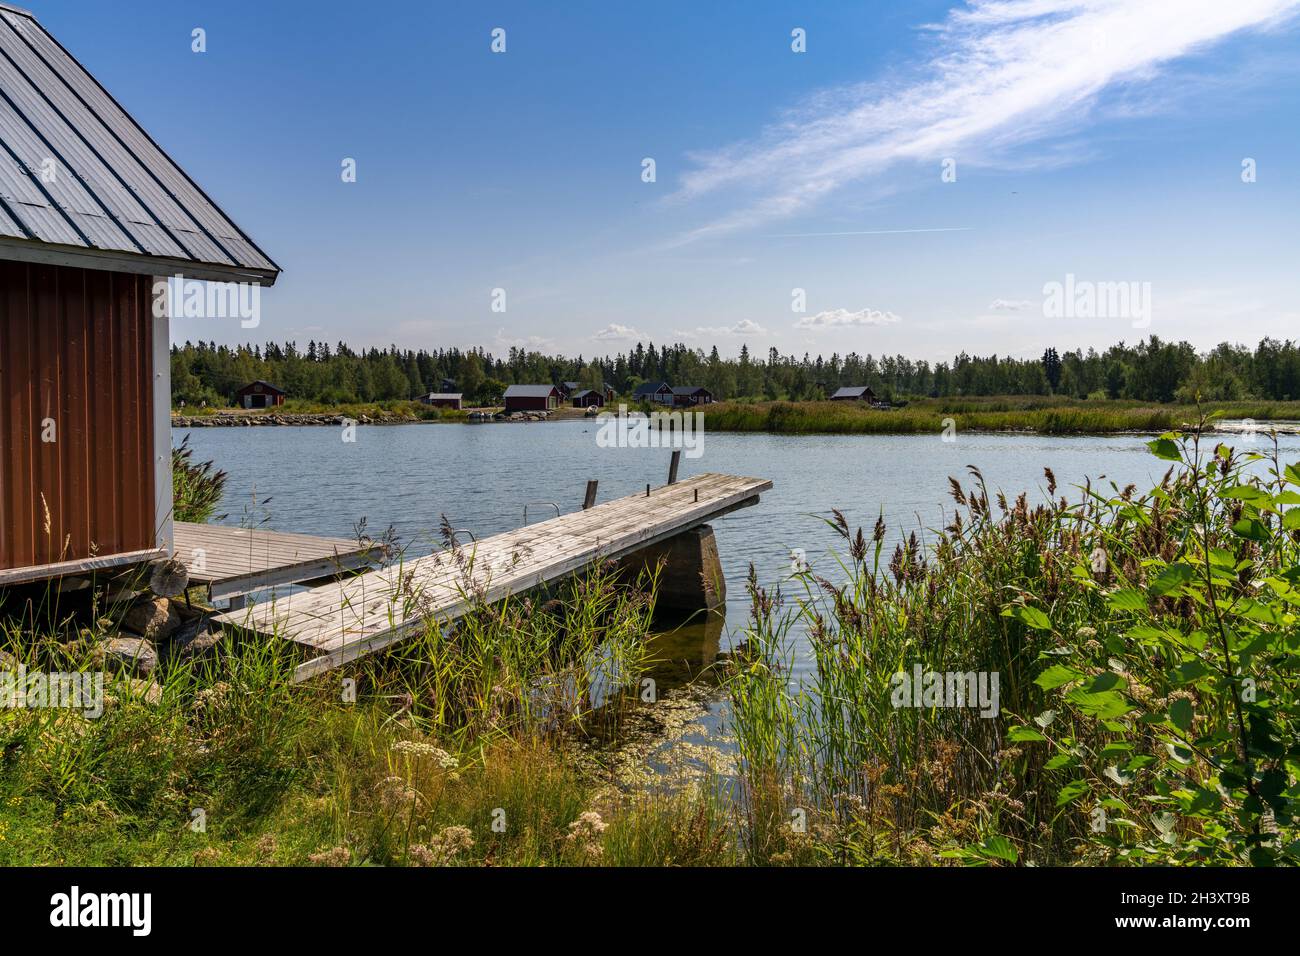 An idyllic lake landscape with a wooden cottage and a wooden dock on a beautiful summer day Stock Photo